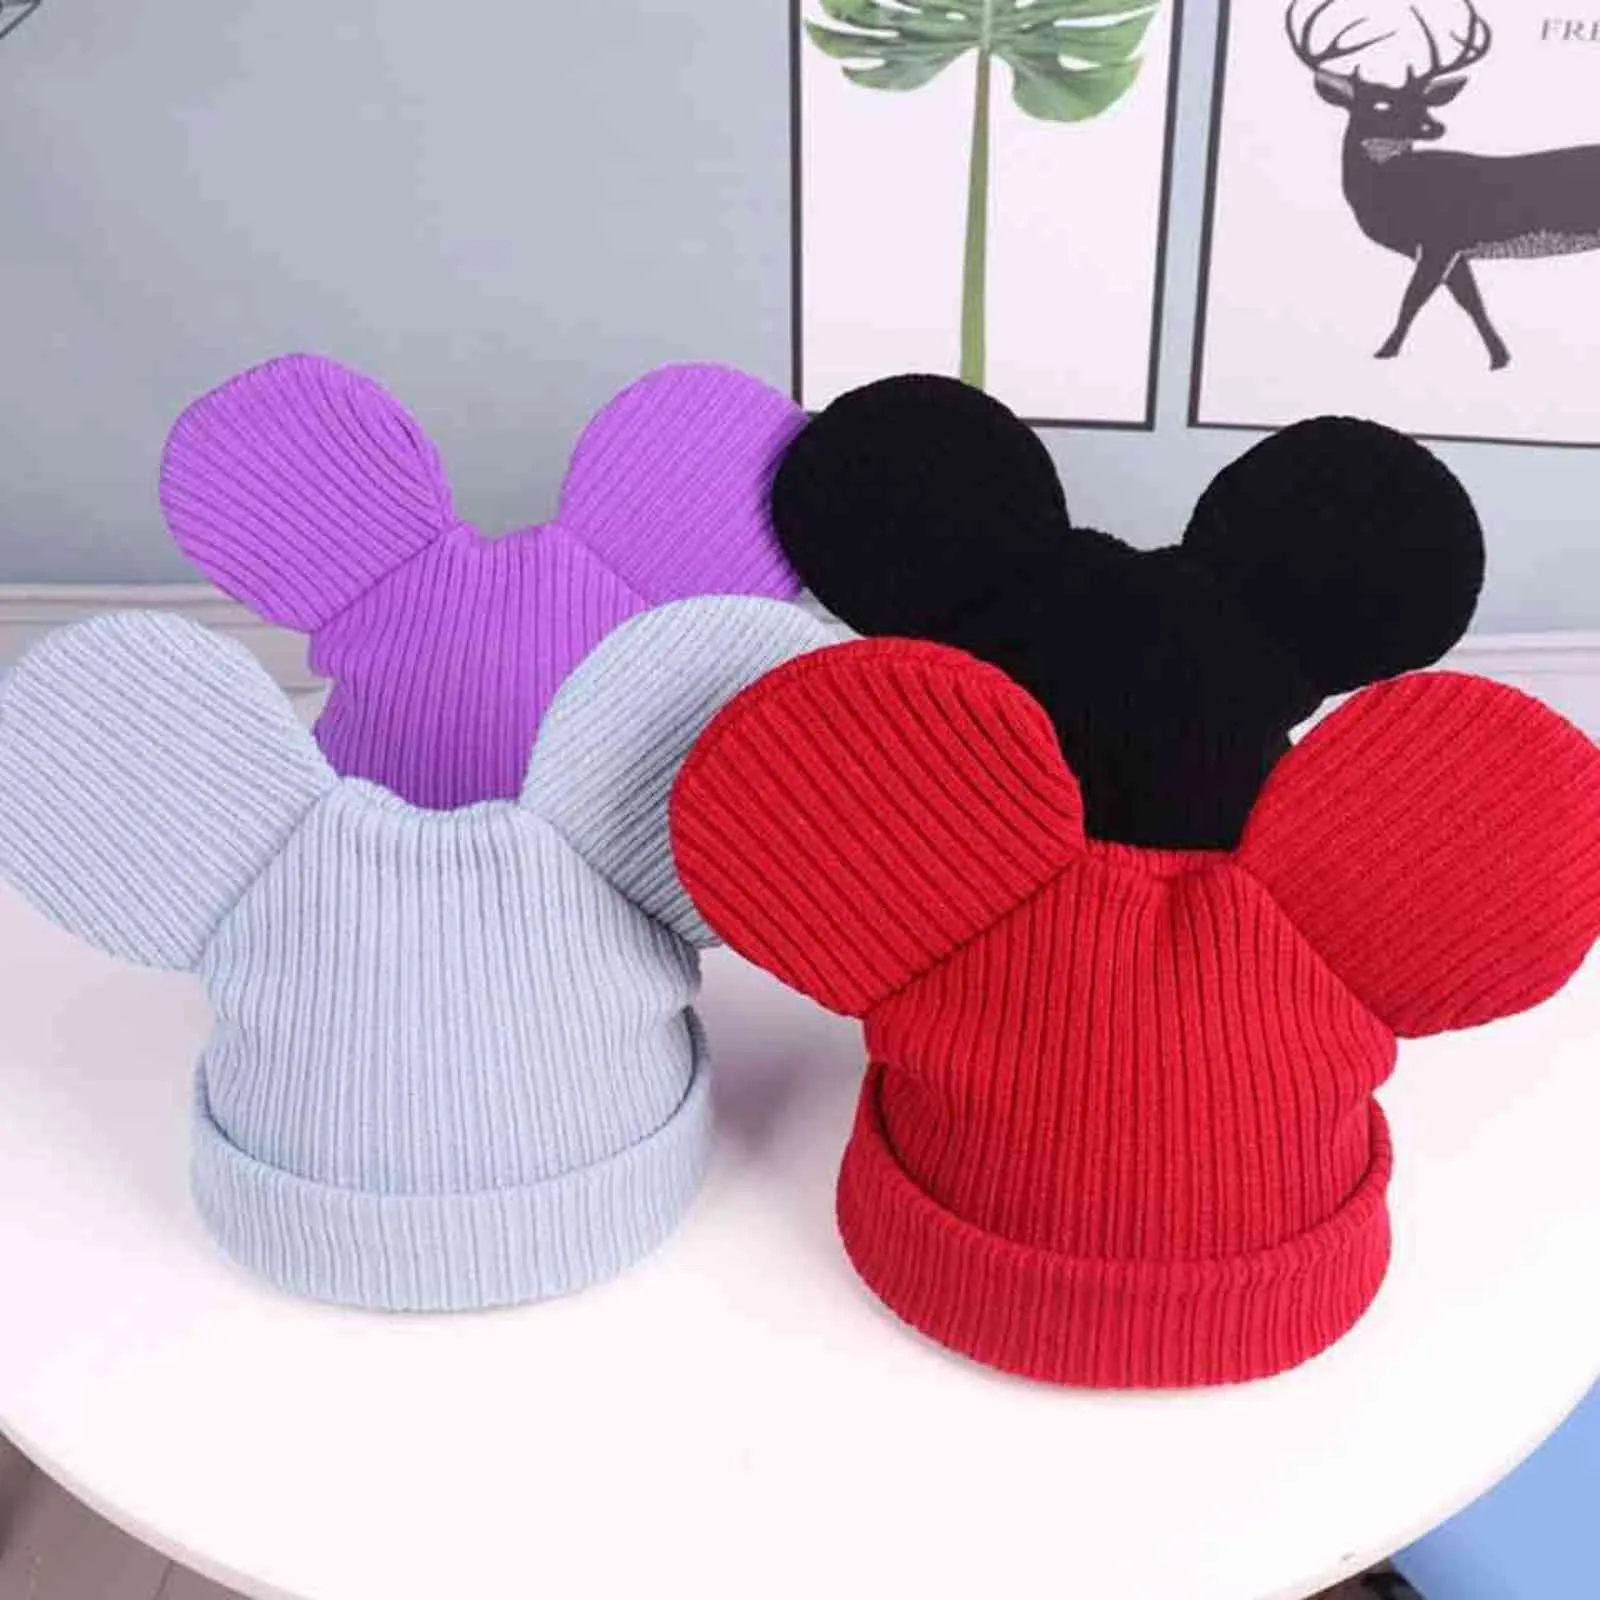 Women's Cute Solid Knitted Hats With Cartoon Mouse Ears for Teenager Beanie Cap Unisex Youngster Boy Girl Warm Winter Kitte Hat Y21111